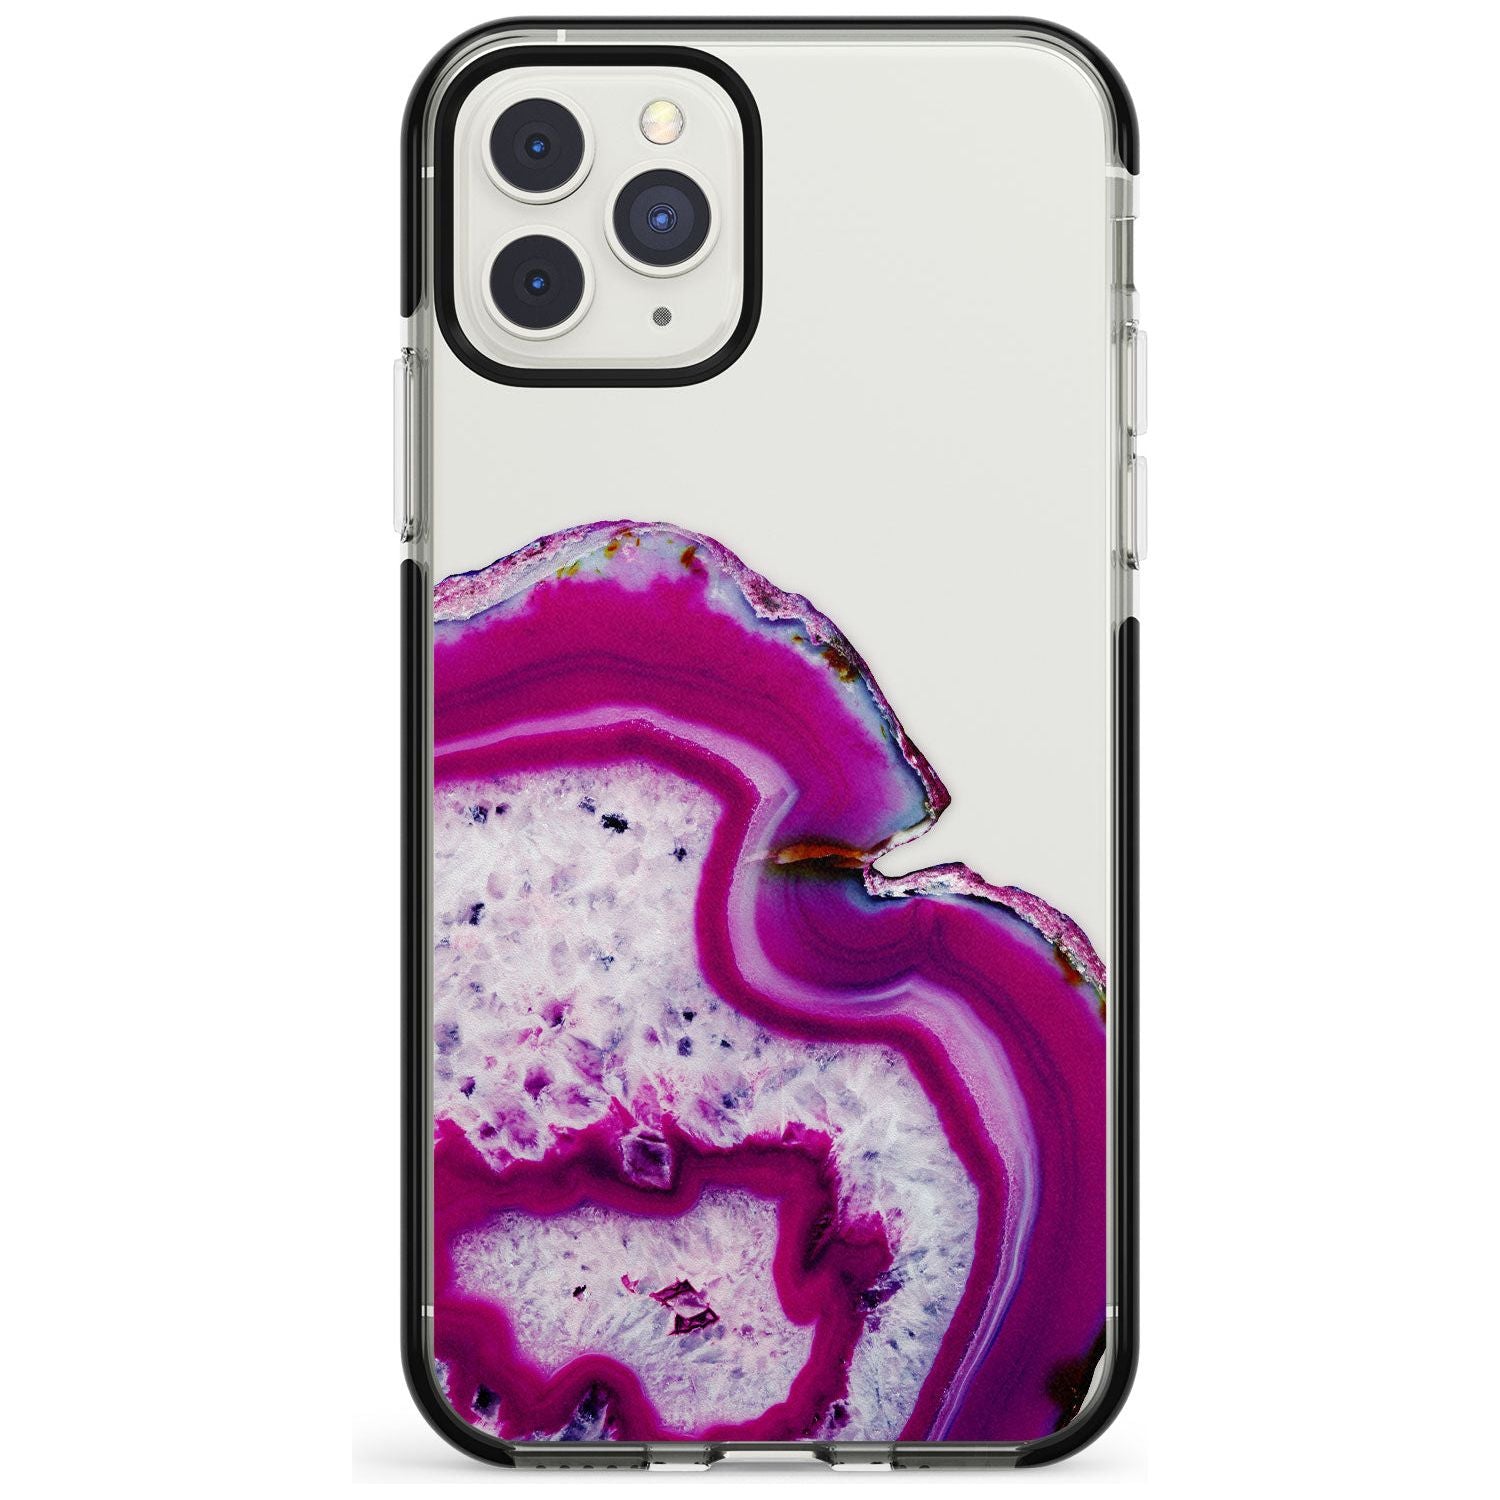 Violet & White Swirl Agate Crystal Clear Design Black Impact Phone Case for iPhone 11 Pro Max